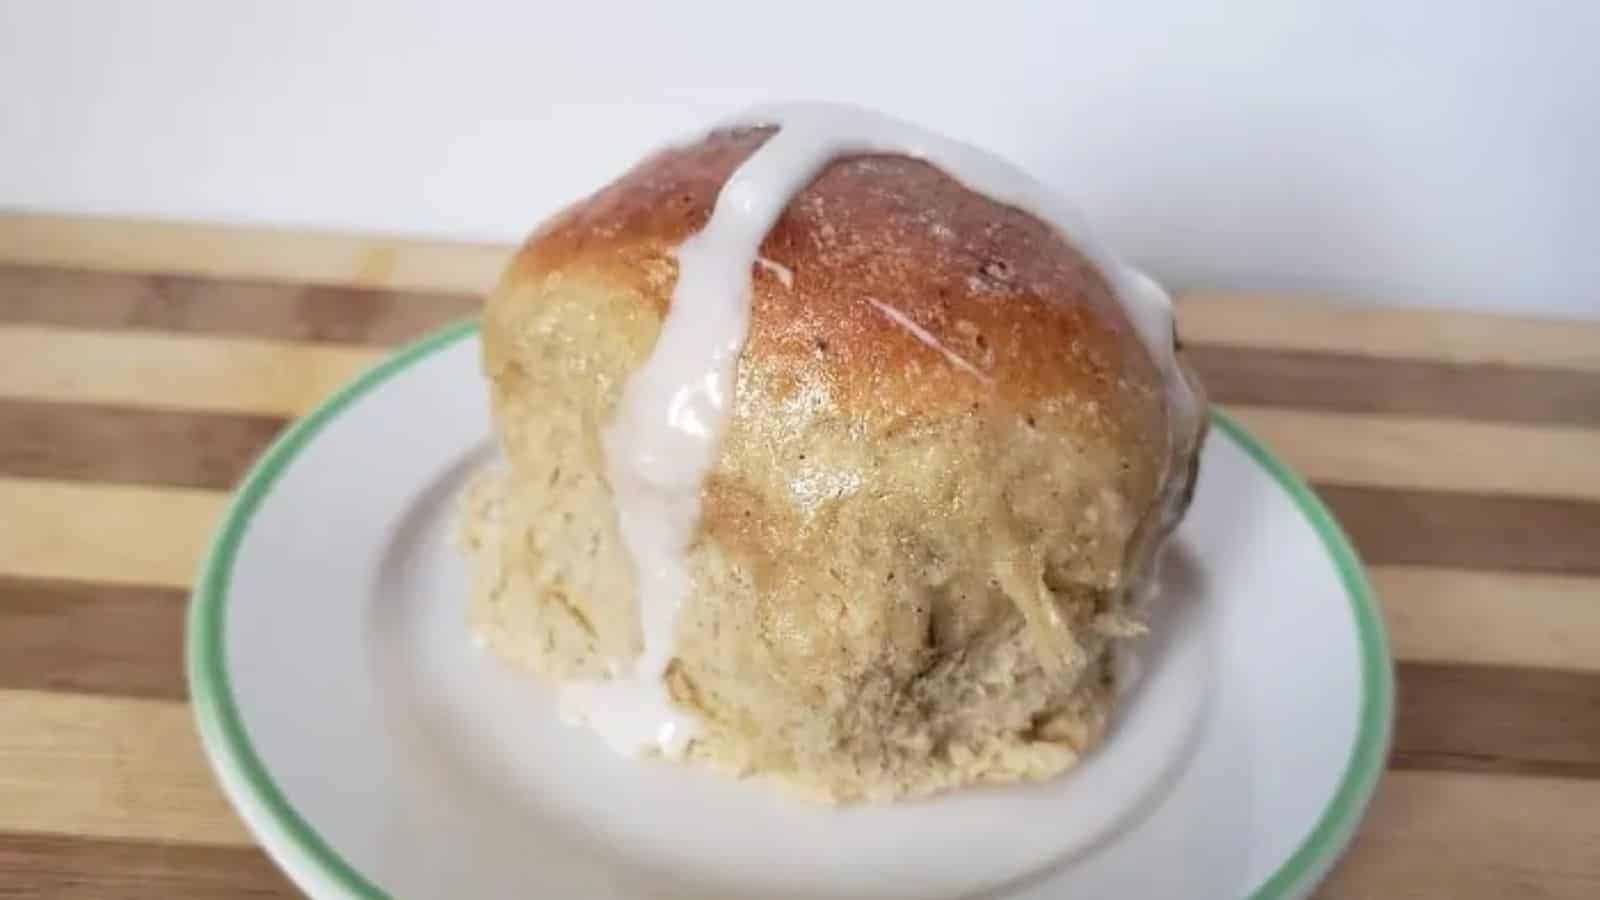 Image shows a hot cross bun with icing sitting on a plate.